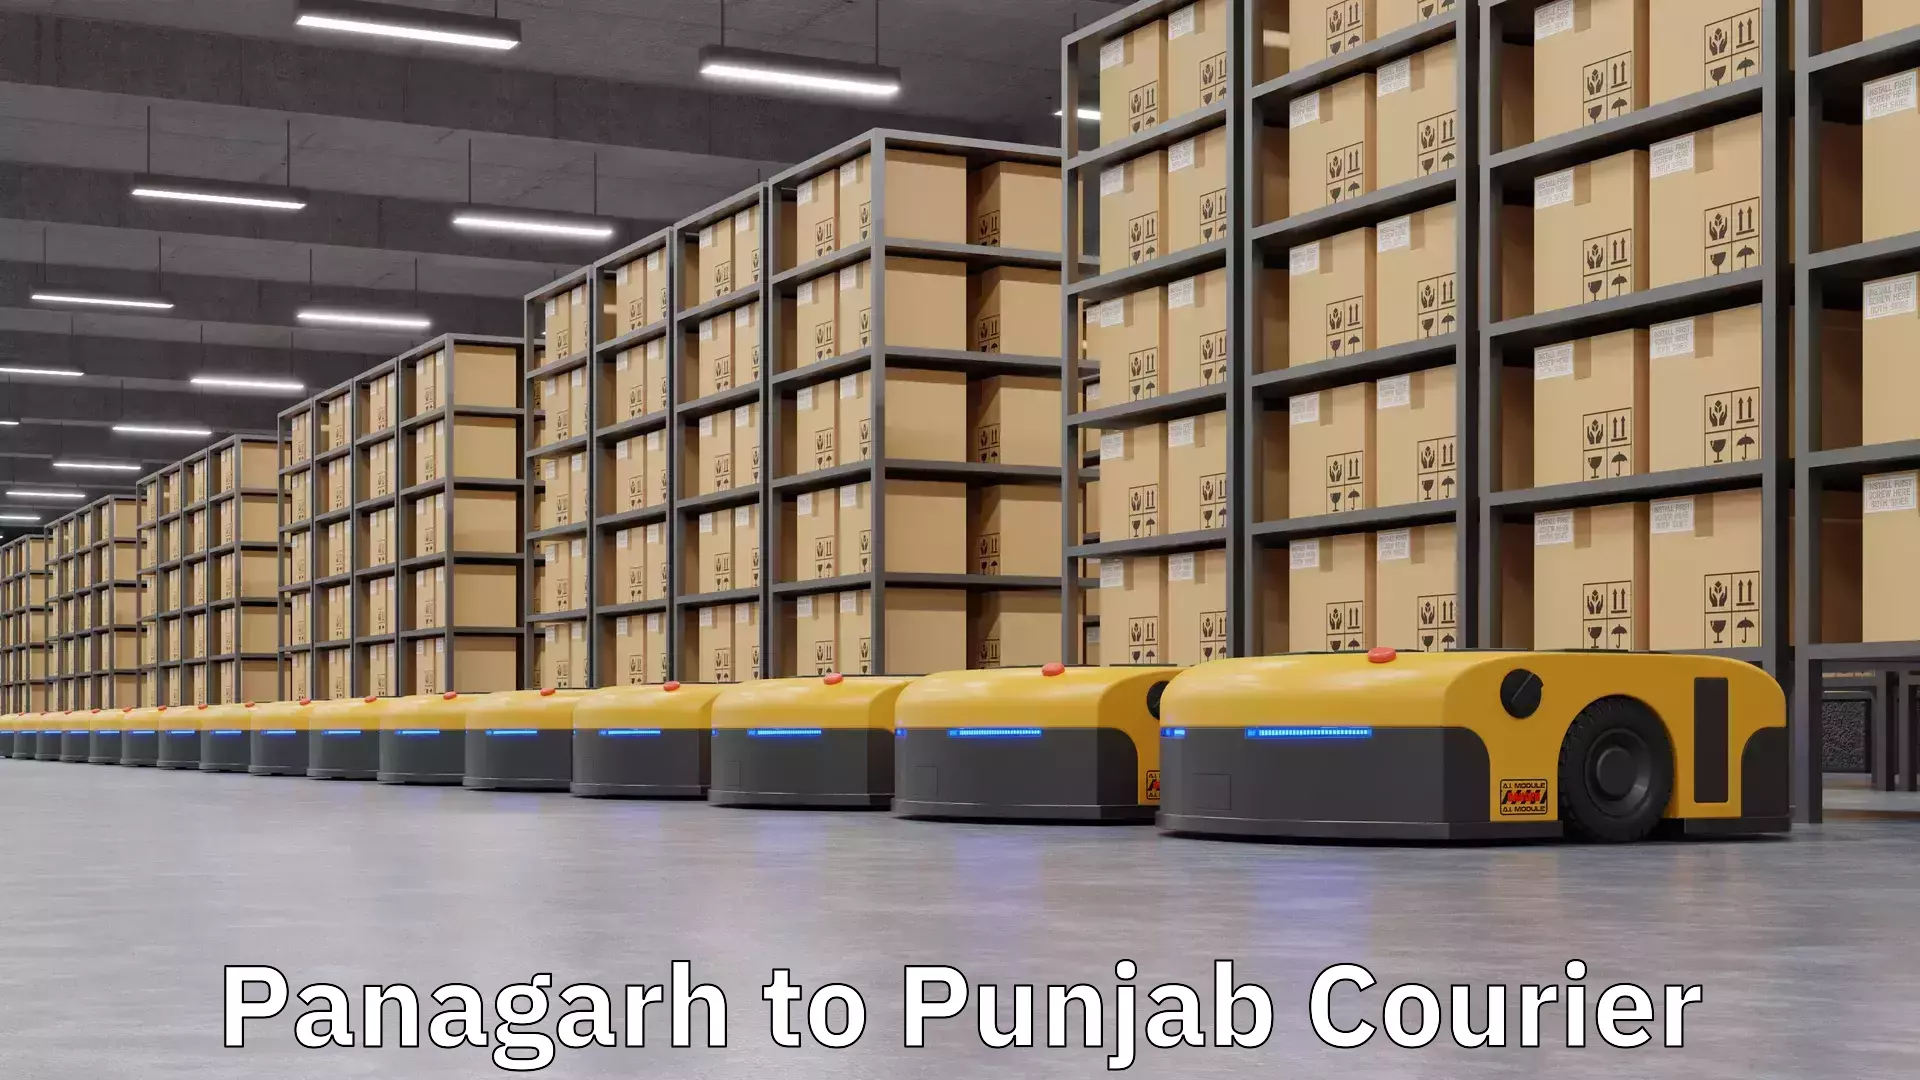 Same-day delivery options Panagarh to Punjab